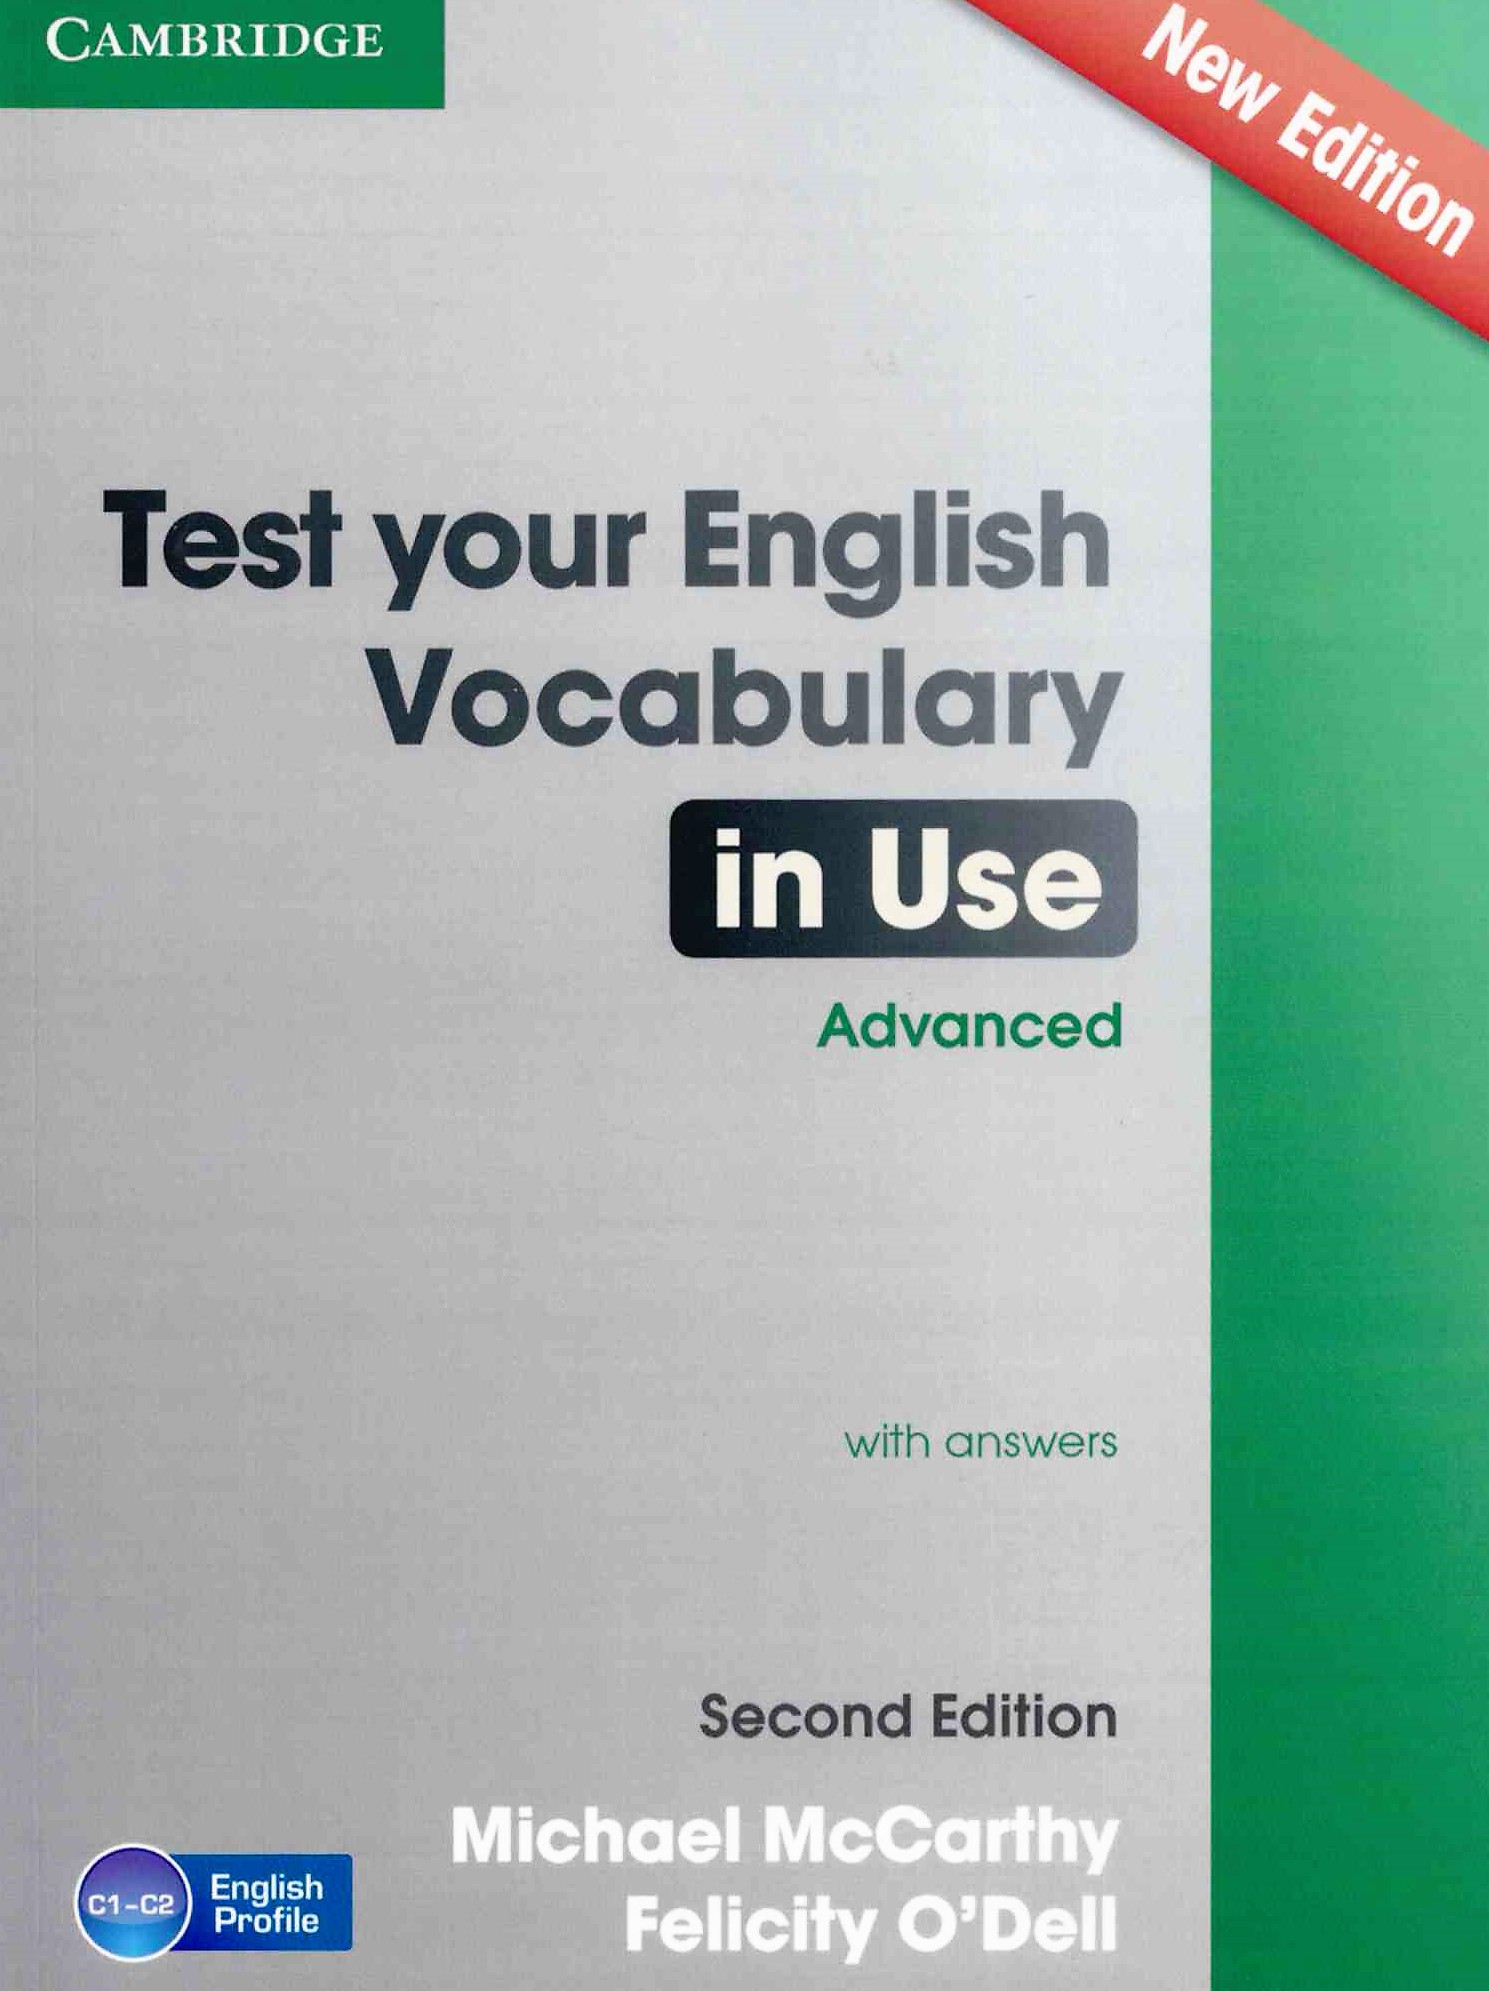 Test Your English Vocabulary in Use (Second Edition) Advanced + Answers